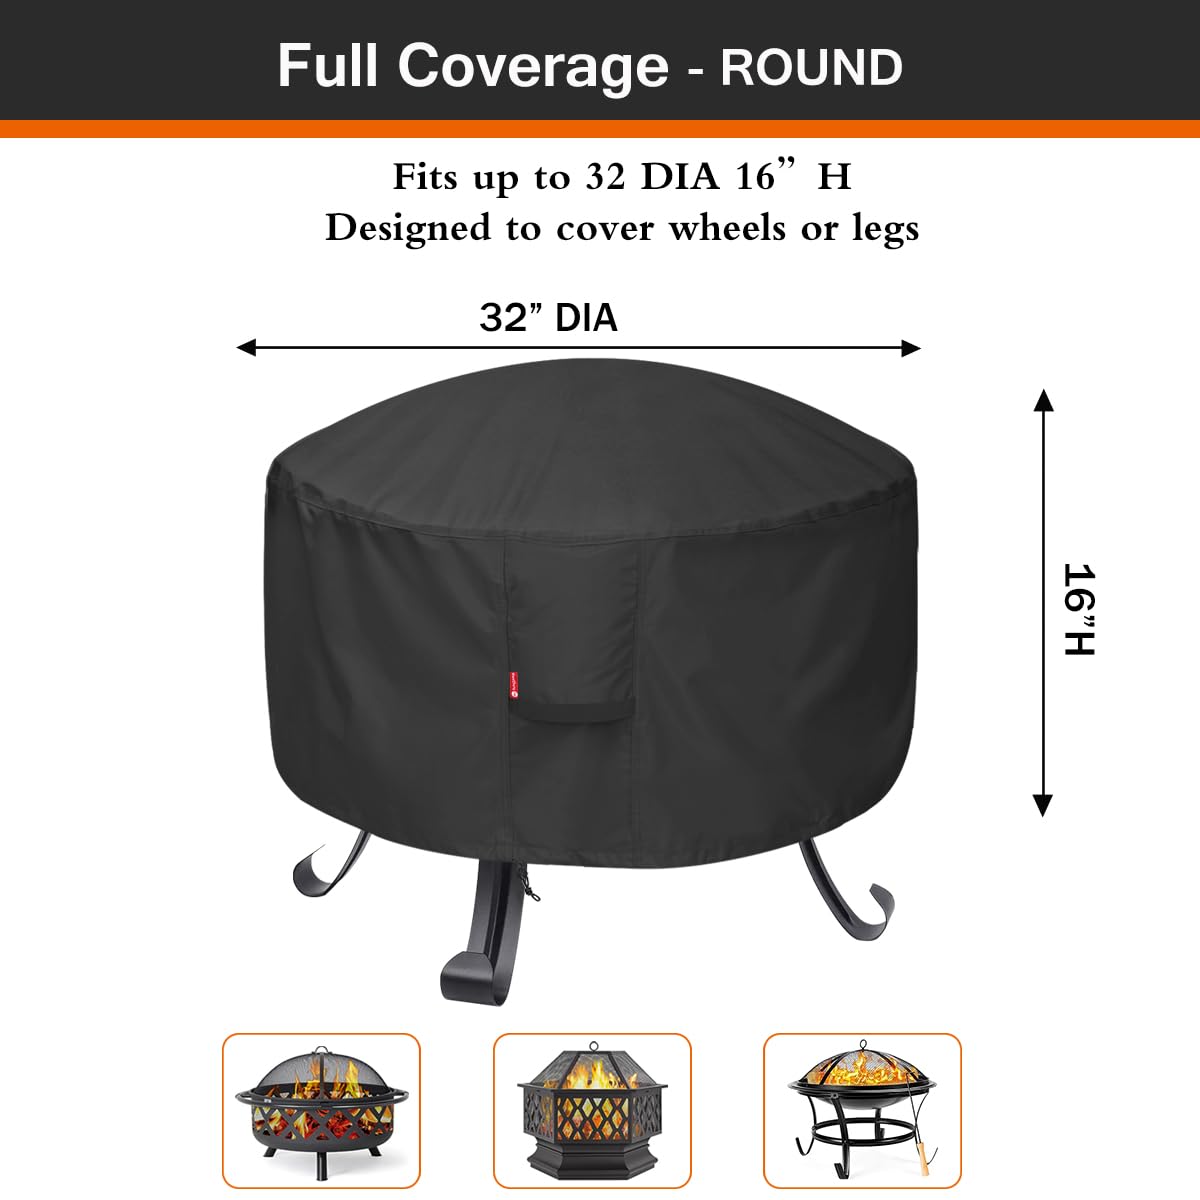 Round Gas Fire Pit / Table Cover,Fits 22-32 inch Firepit/Bowl,Heavy Duty 600D Polyester with PVC Coating Material, 100% Weather Resistant&Waterproof for Backyard, Porch, Camping, BBQ (Round-32”Dx16”H)